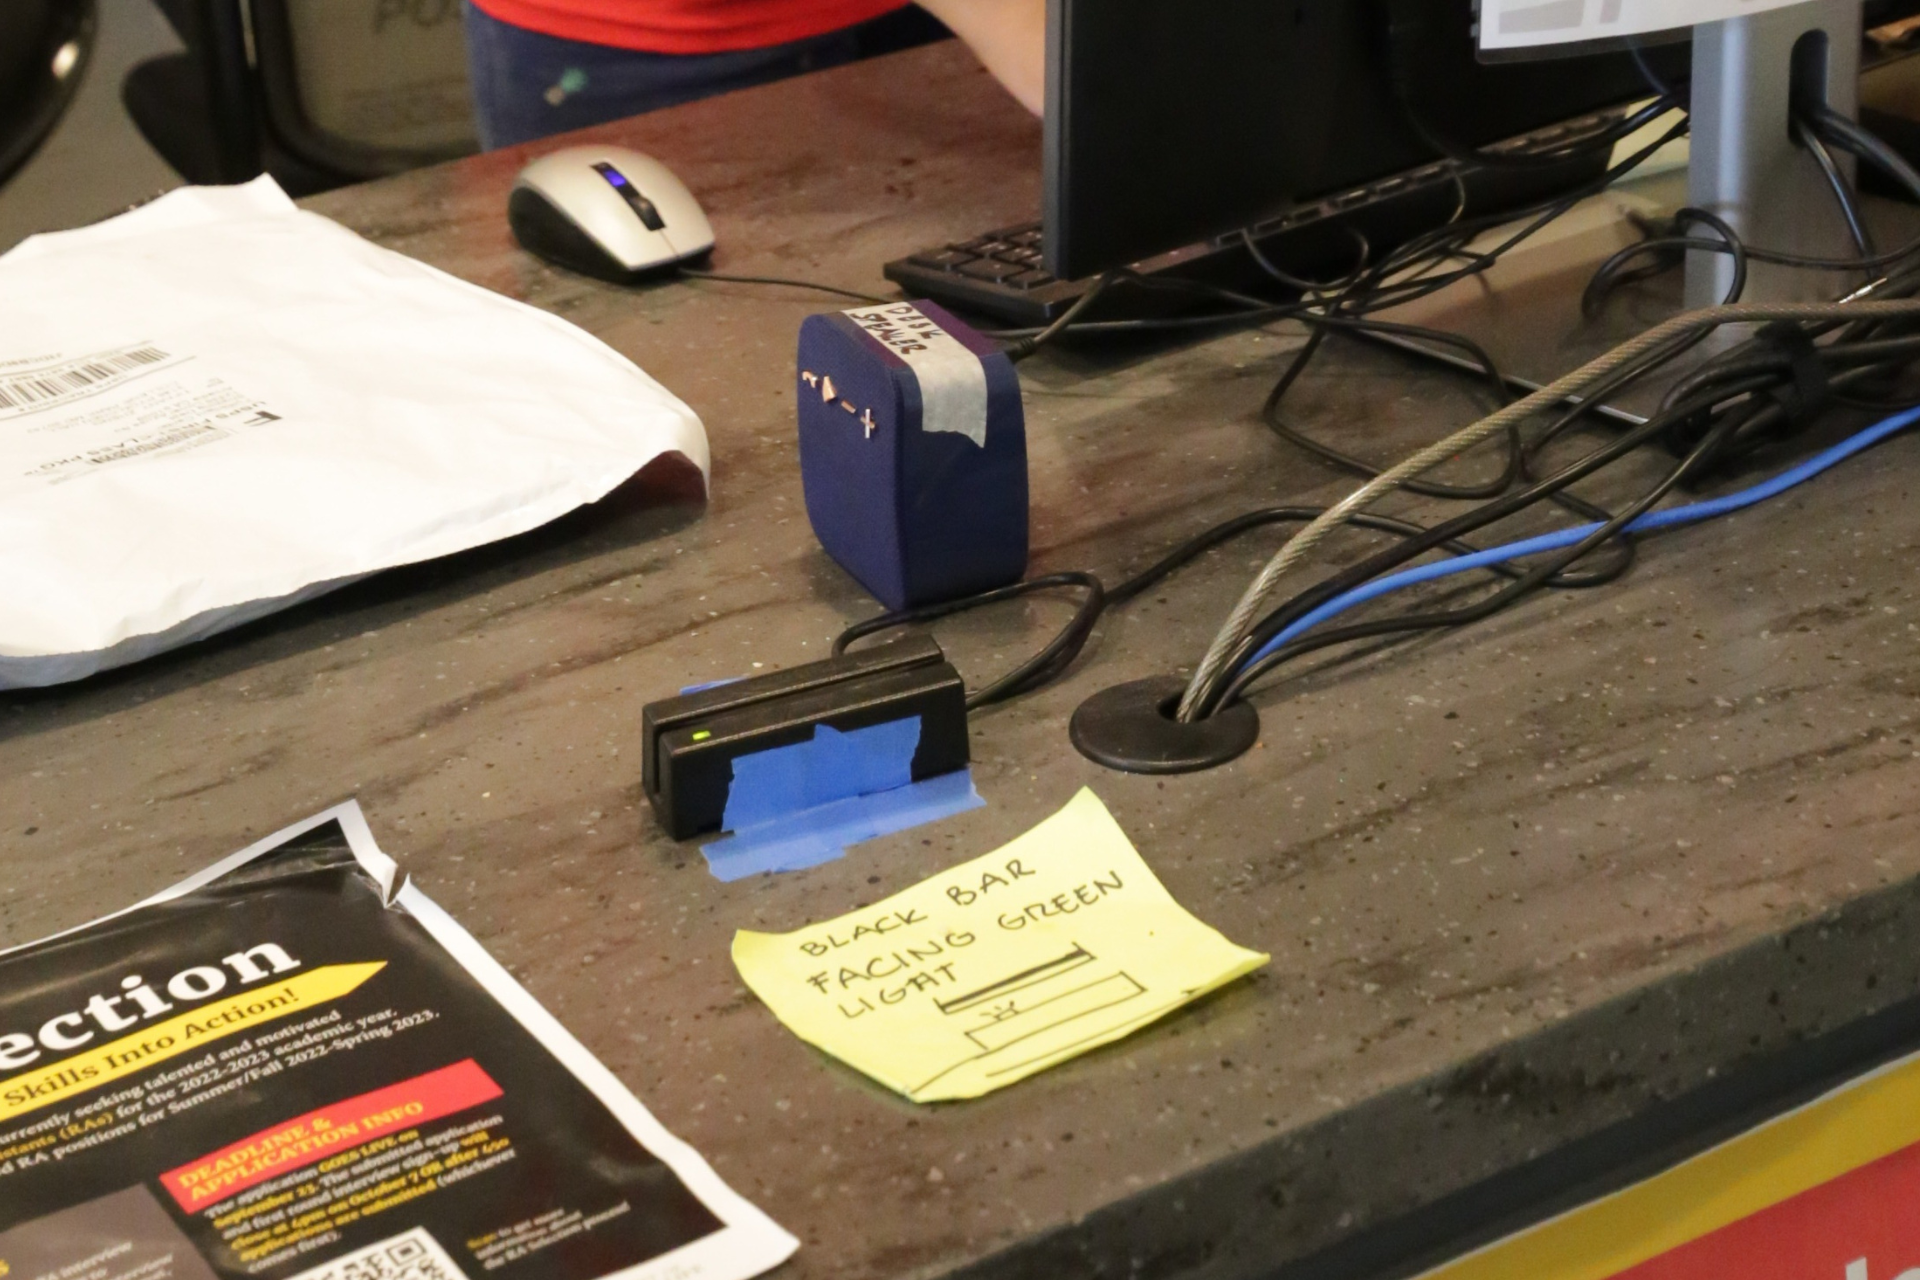 card swipe device on service desk with handwritten note that provides instructions